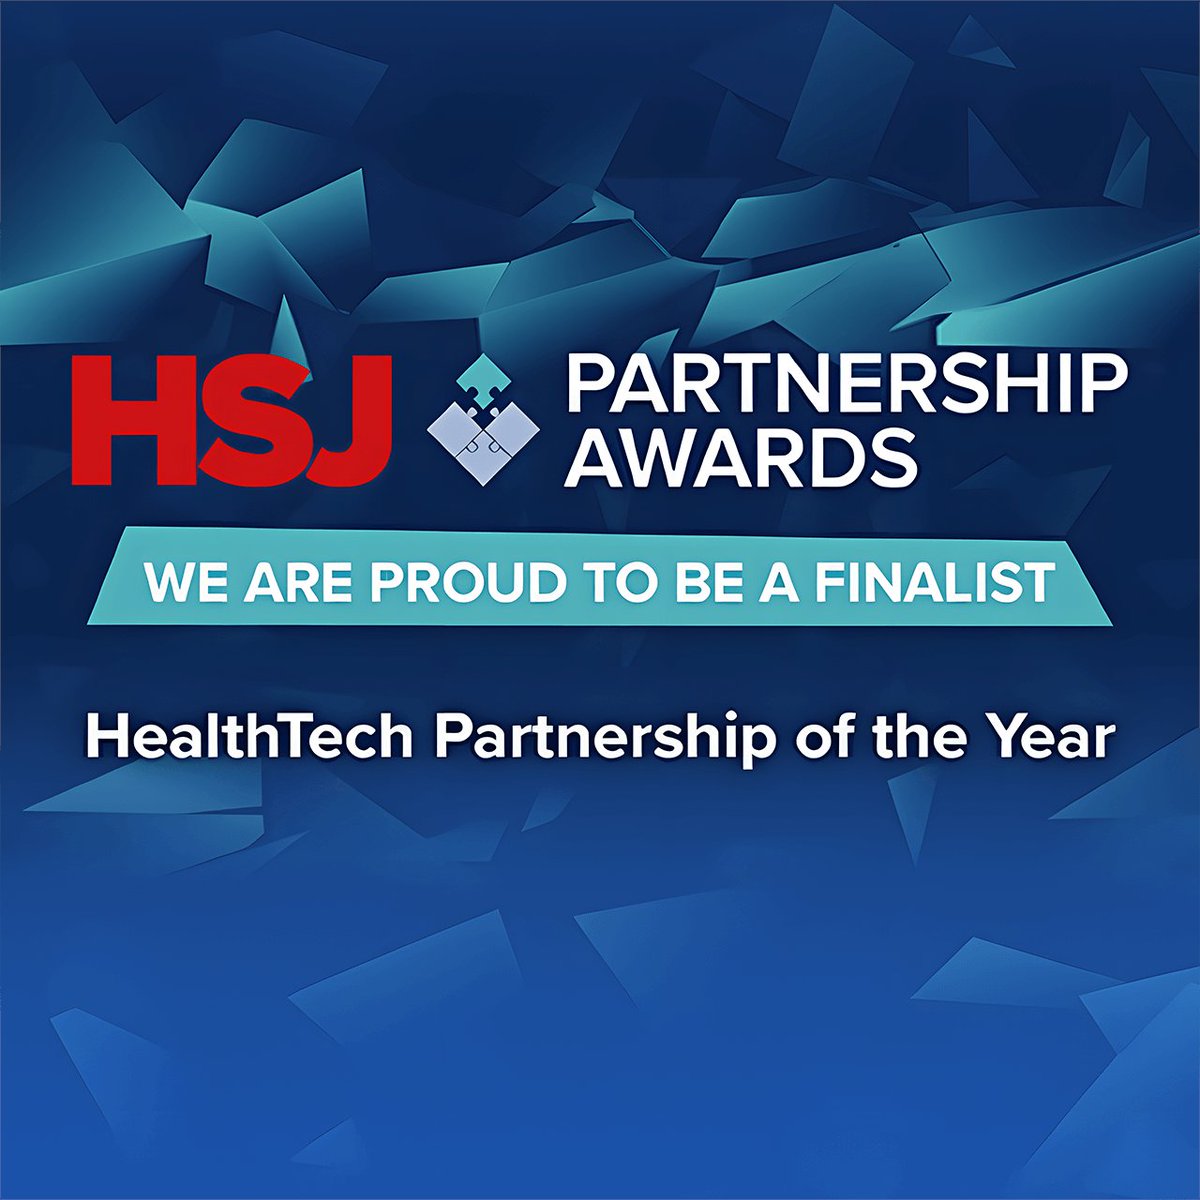 The Heart Failure team @ChelwestFT exemplifies how digital solutions can enhance patient care. Thrilled our partnership was shortlisted for @HSJ_Awards Wishing the team luck tonight @sadiahasnain @_KBH3 🤞 #HSJPartnershipAwards vist.ly/s4kf